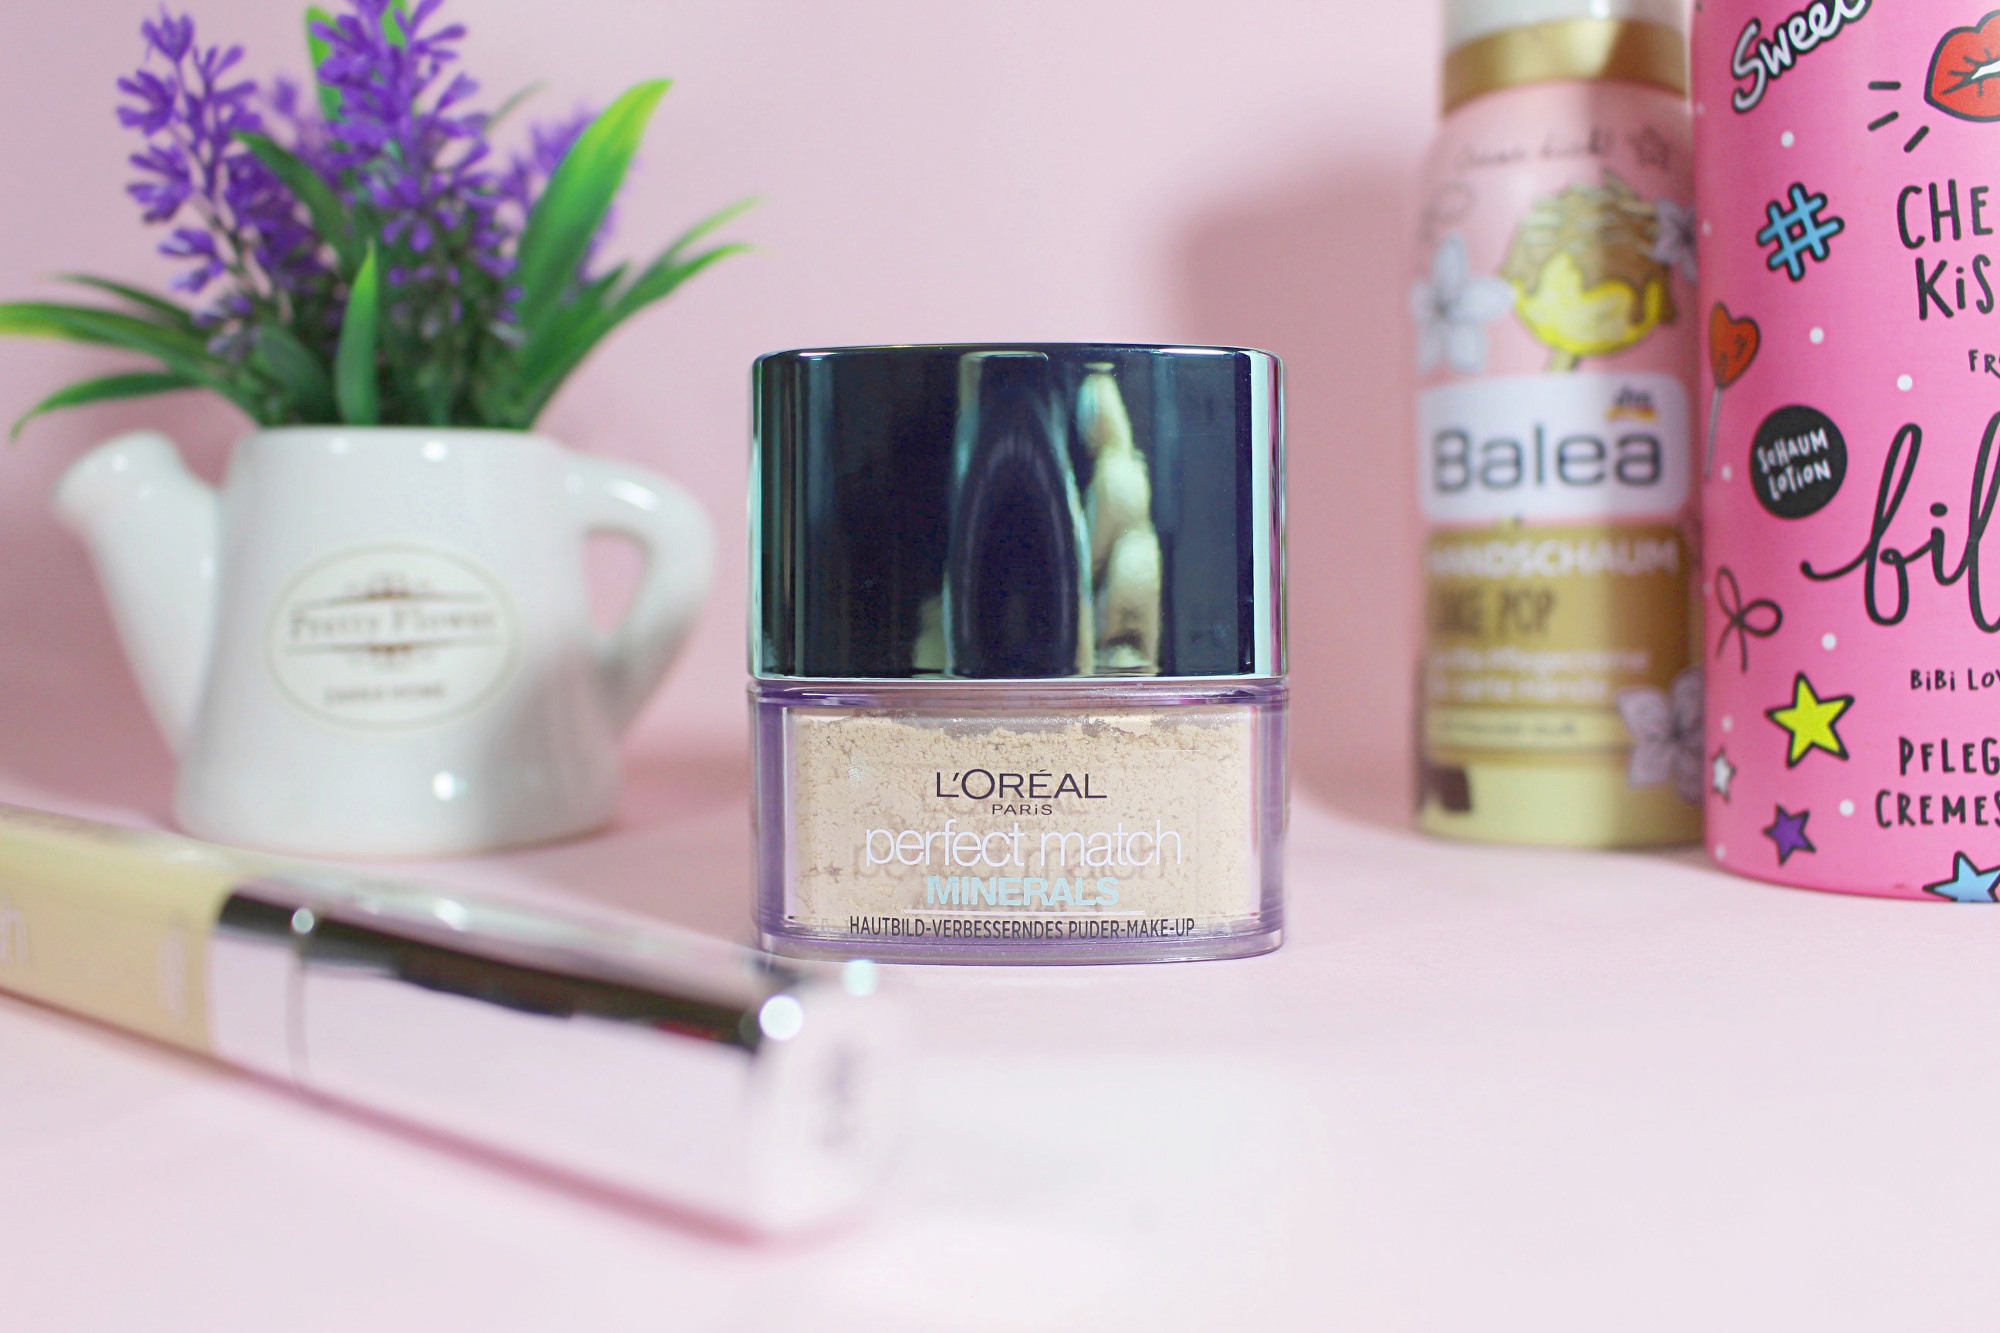 True Match Mineral Powder by L'Oréal | Review & First Impressions on the January Girl beauty and fashion blog curated by Liz Breygel.